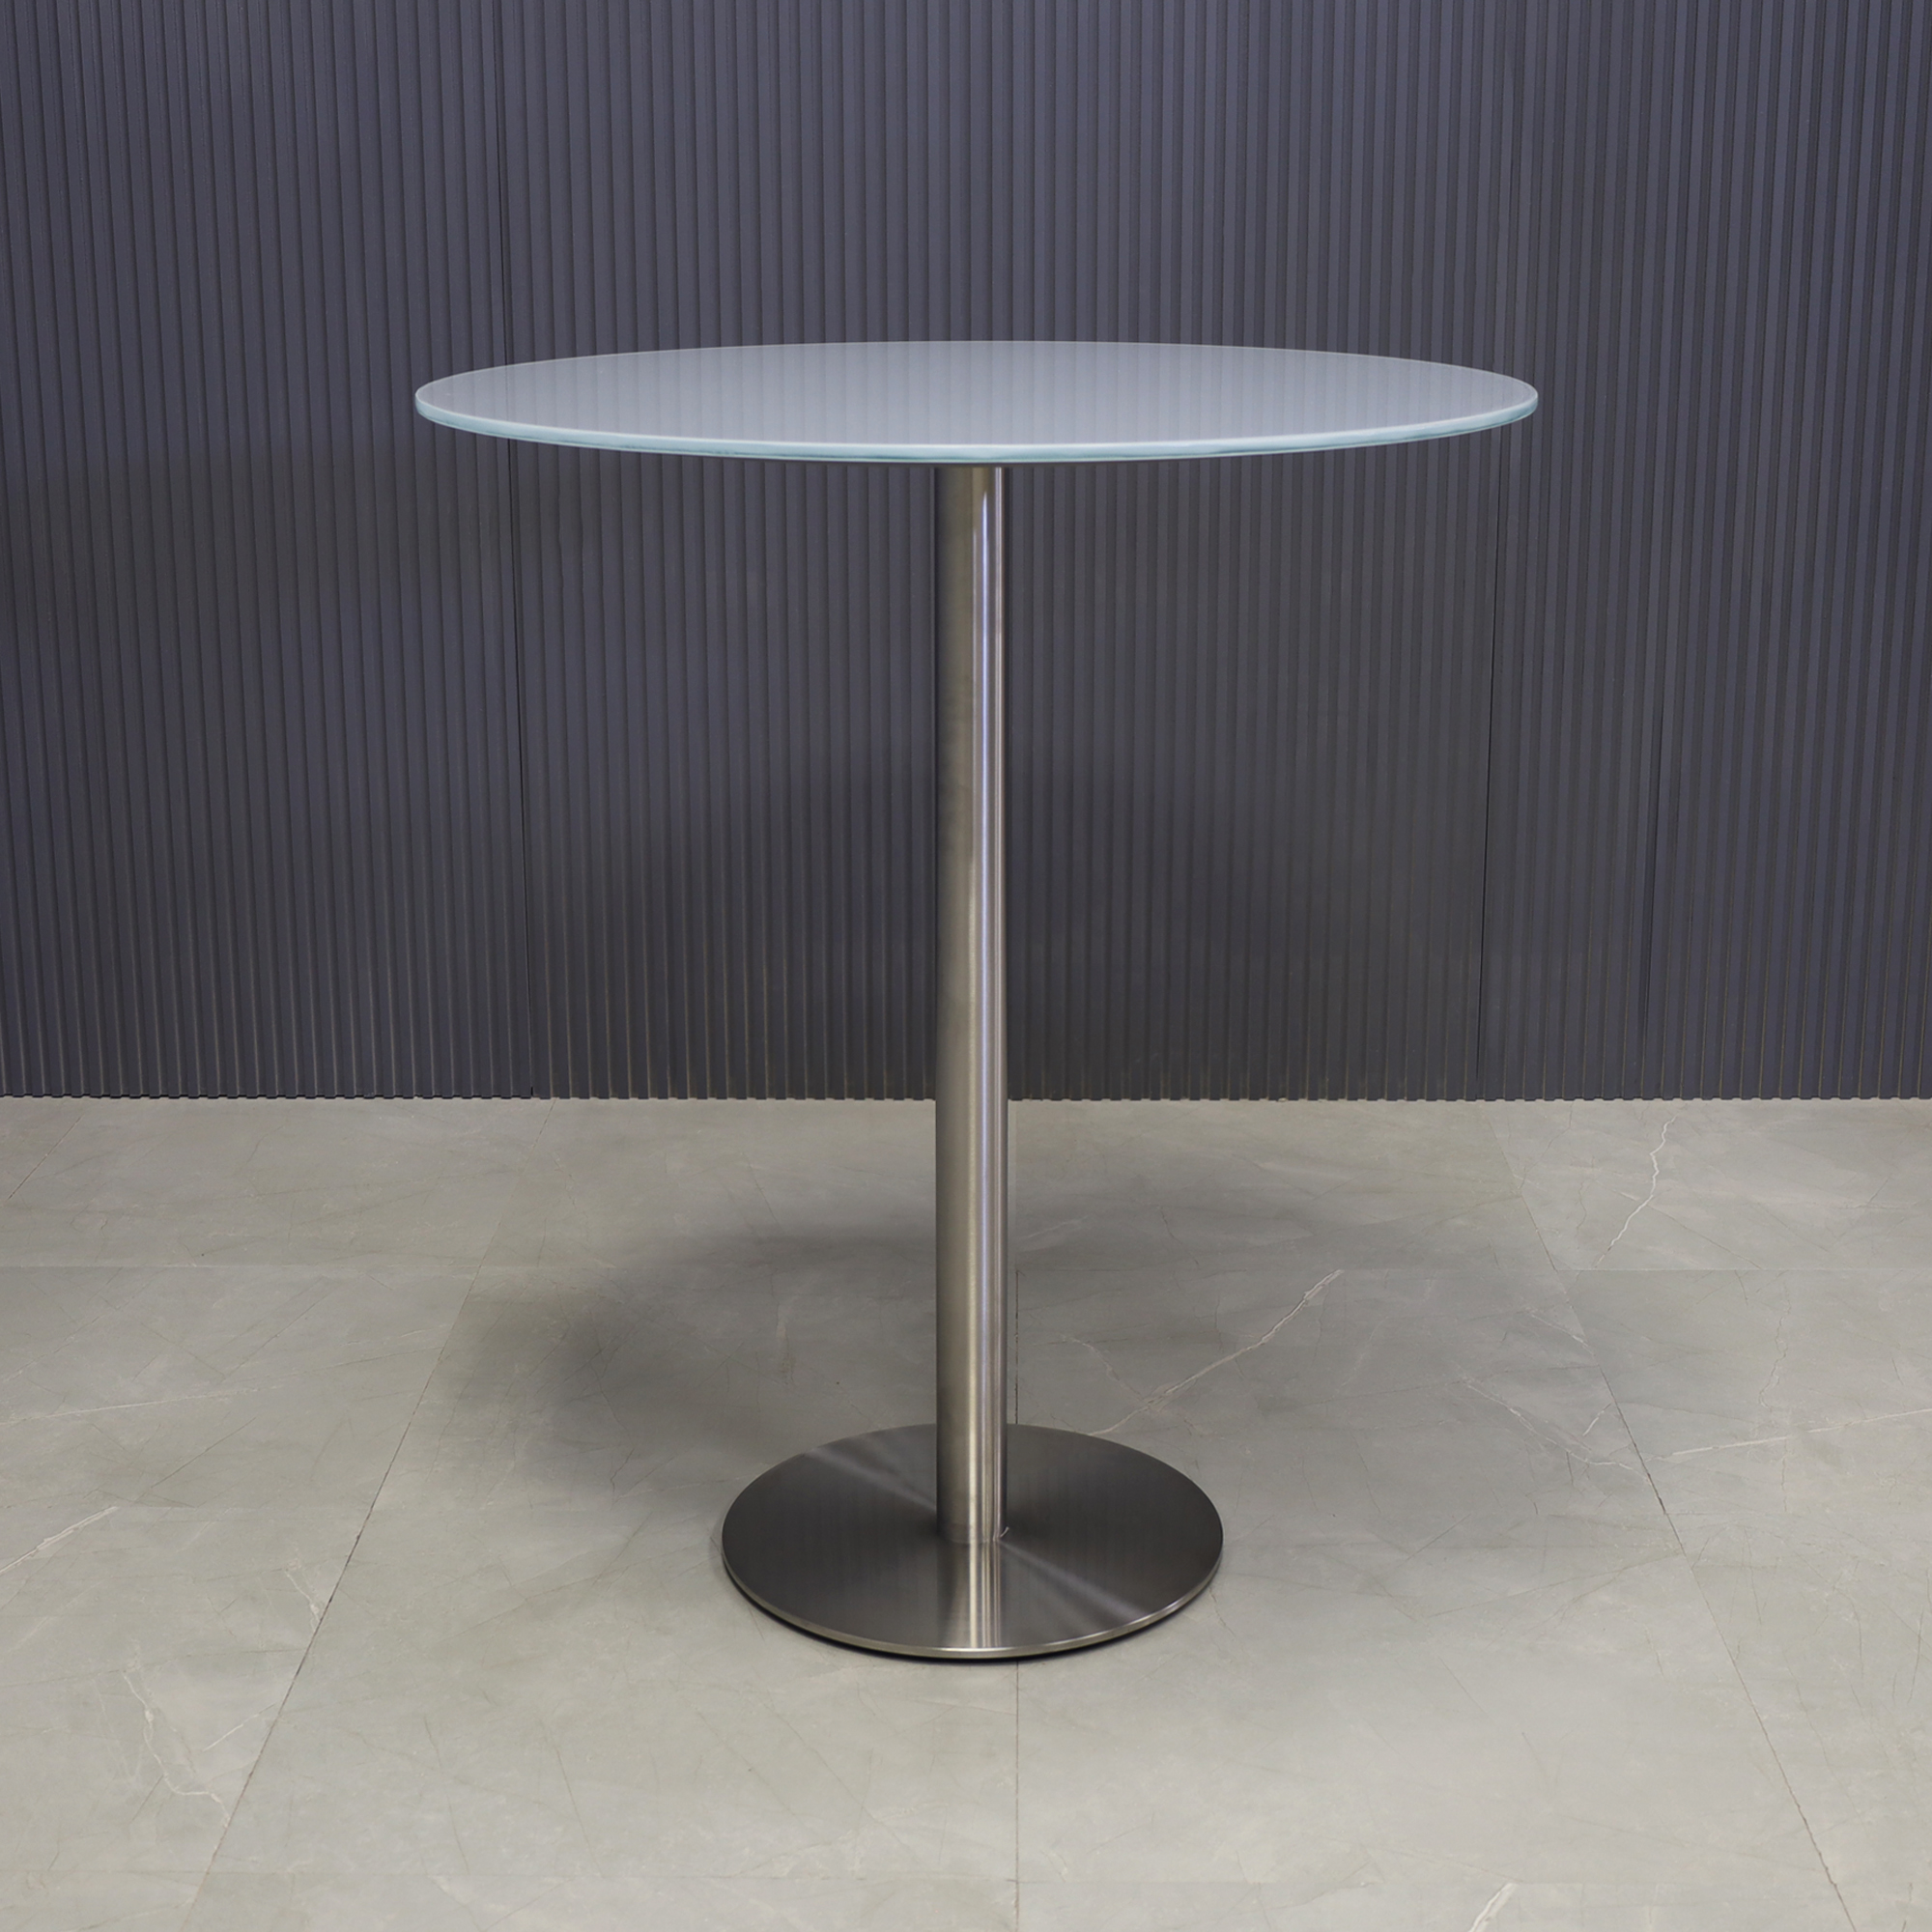 36-inch California Round Bar Table in 1/2